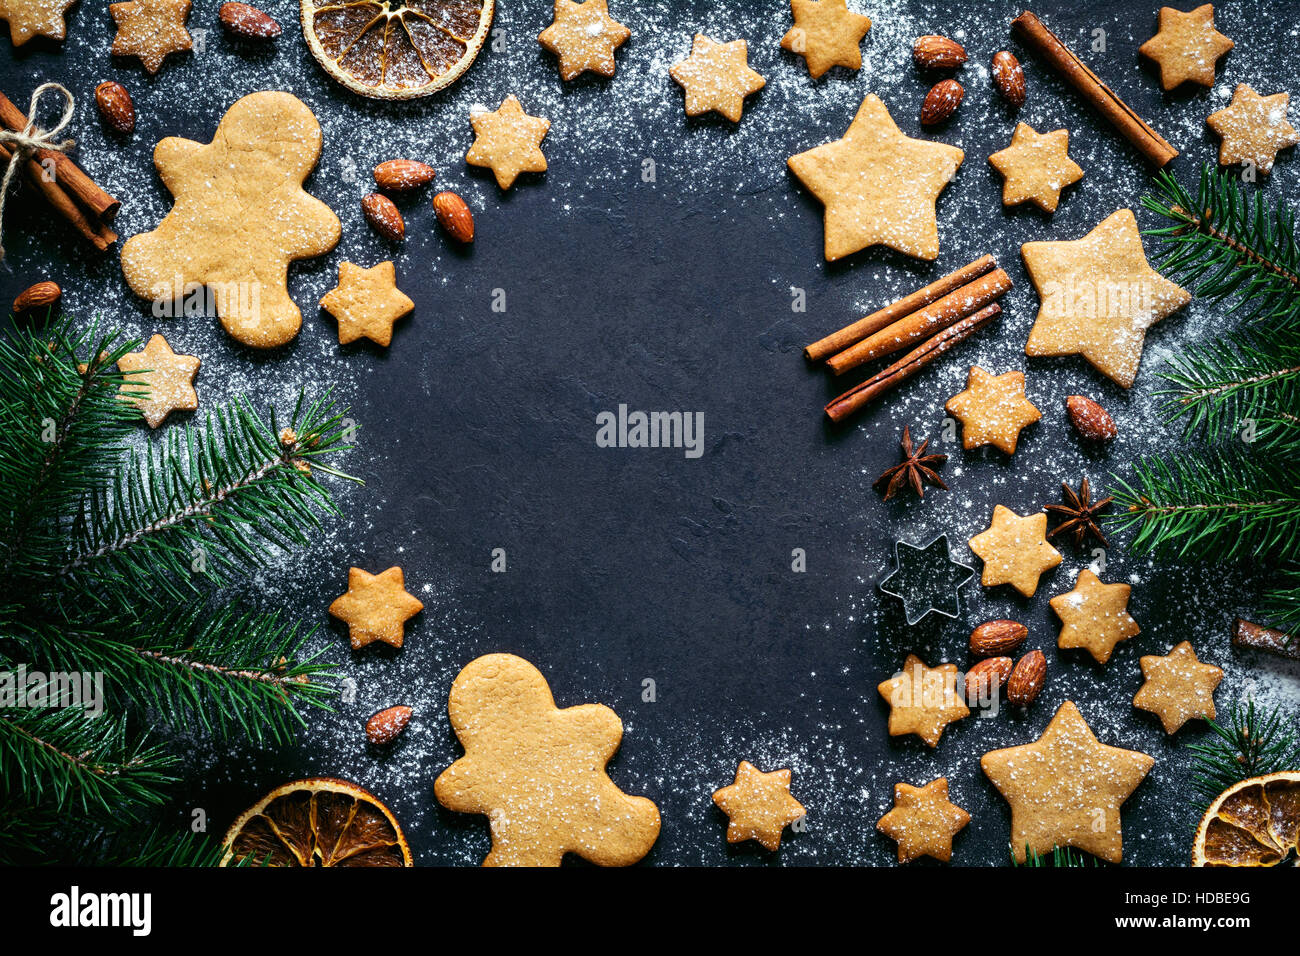 Christmas or New Year background with gingerbread cookies, gingerbread man cookies, stars, spices, cinnamon and fir tree Stock Photo